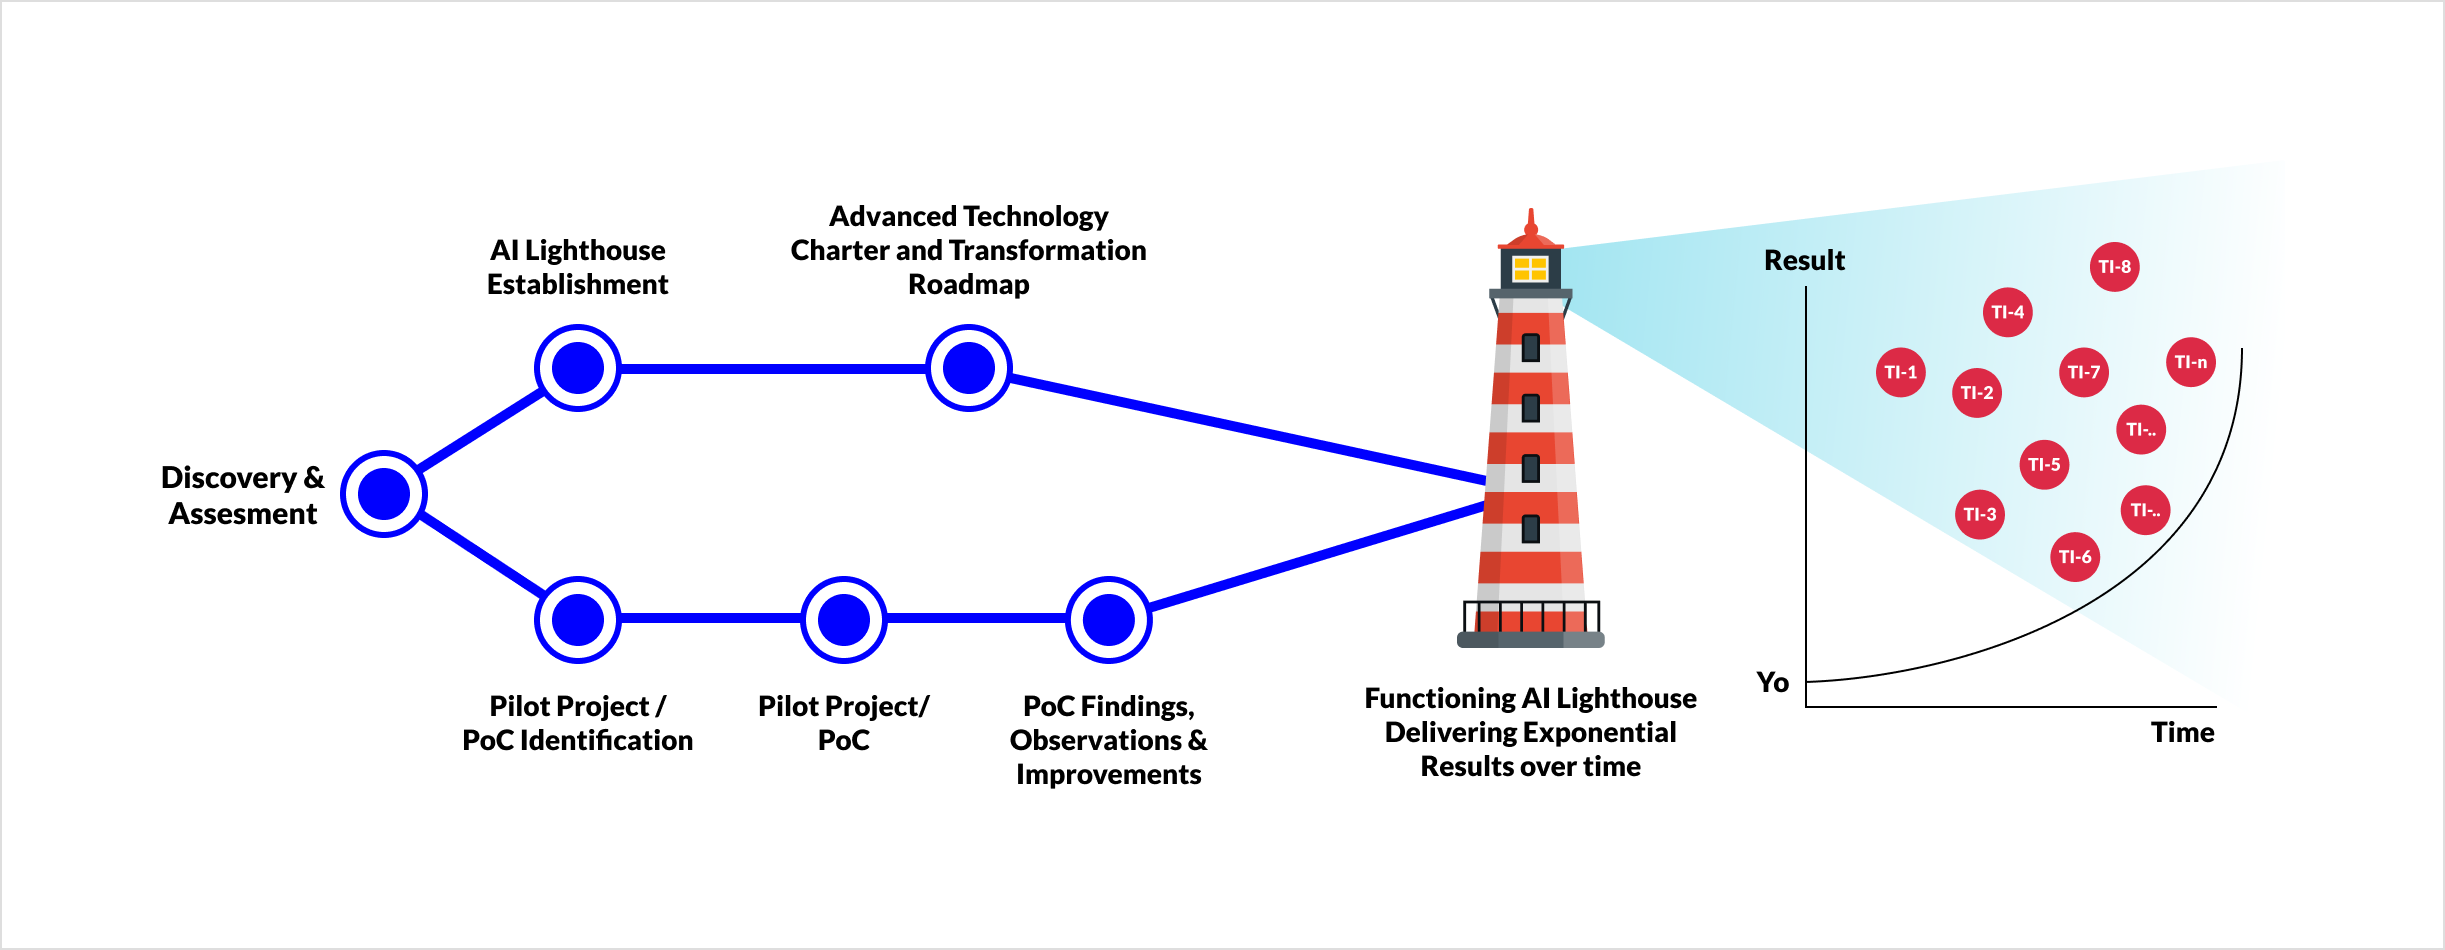 The image is a graphical representation of the development process for an AI Lighthouse Establishment. On the left, a linear roadmap with five circular nodes illustrates the progression from "Discovery & Assessment" to "Advanced Technology Charter and Transformation Roadmap" through steps like "Pilot Project/PoC Identification" and "PoC Findings, Observations & Improvements". The graphic uses a simple blue and white color scheme with connecting lines between each node. On the right, there is a metaphorical depiction of a functioning AI lighthouse with a beam of light showcasing results over time, labeled with "T1-1" through "T1-N" to symbolize various targets or milestones. The lighthouse is stylized, striped in red and white, standing on a baseline that curves upwards to represent increasing results over time.